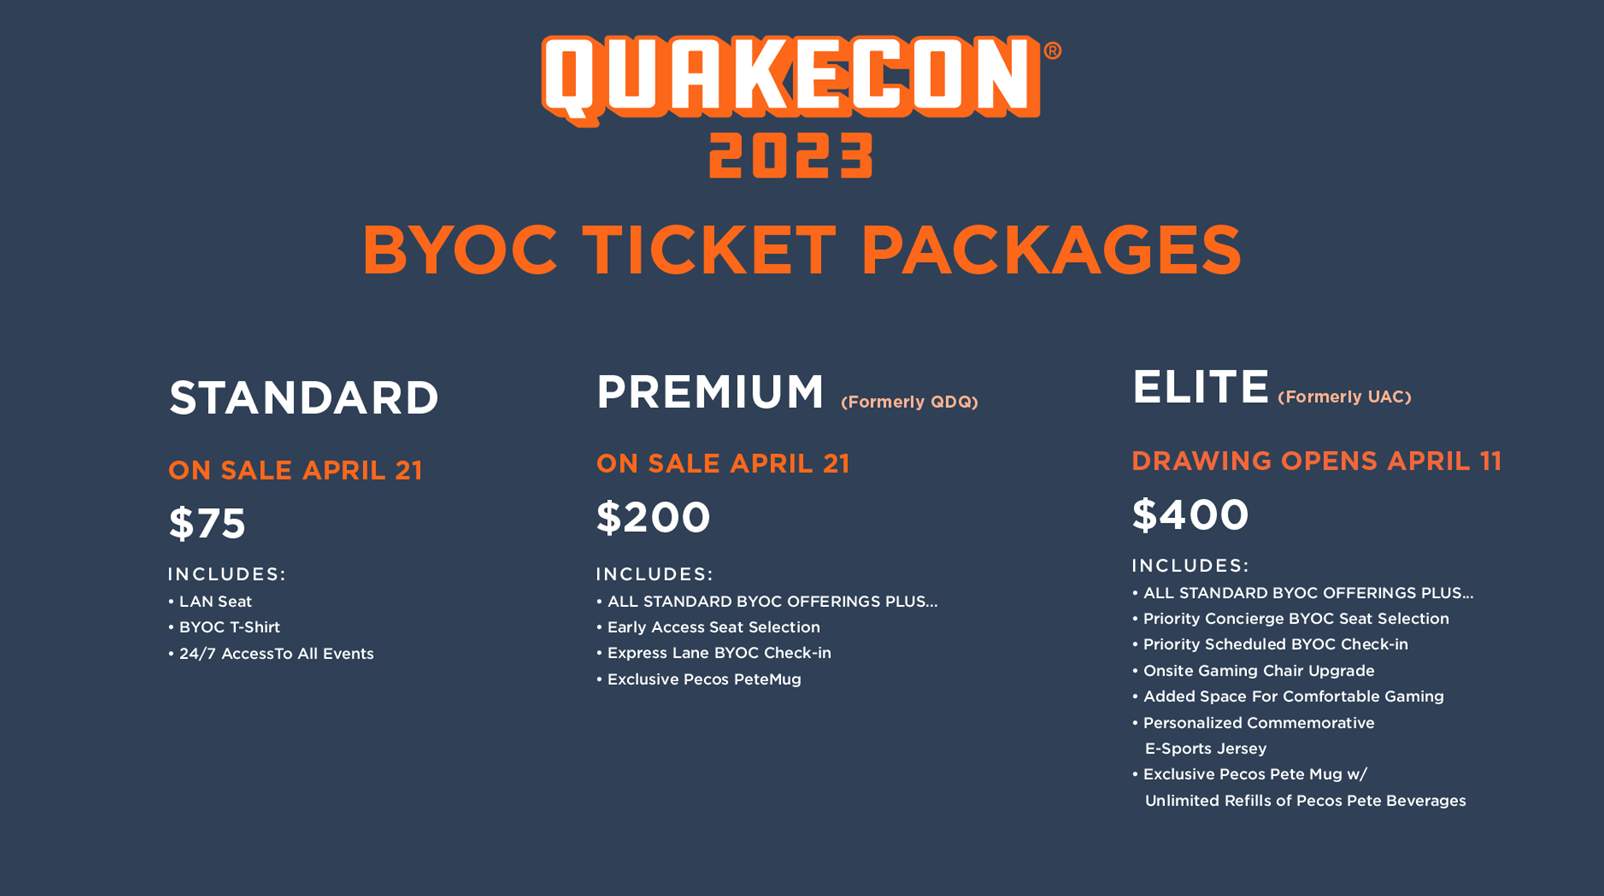 Ticket packages and pricing details